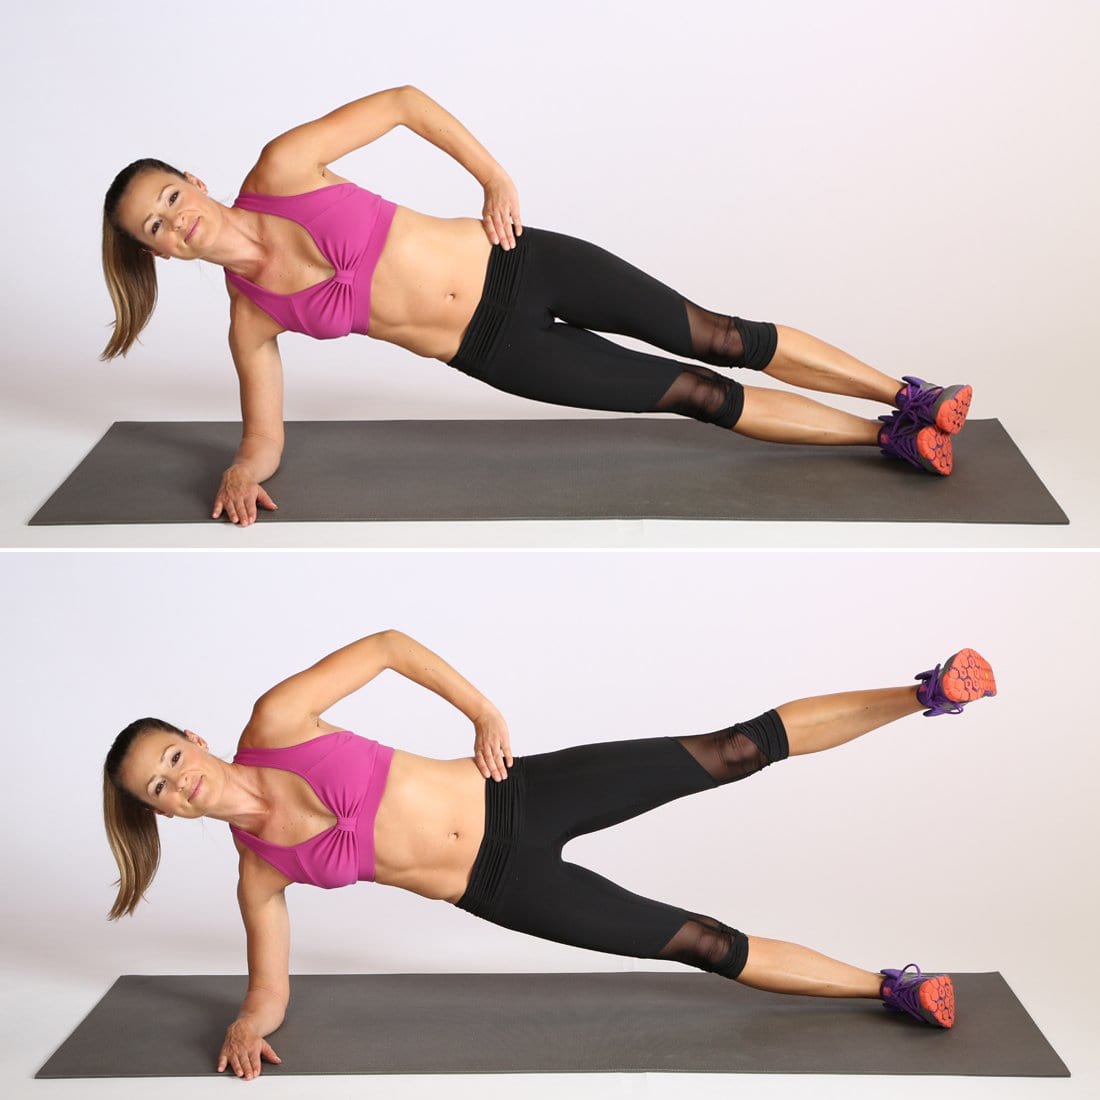 woman performing the side plank leg raise exercise